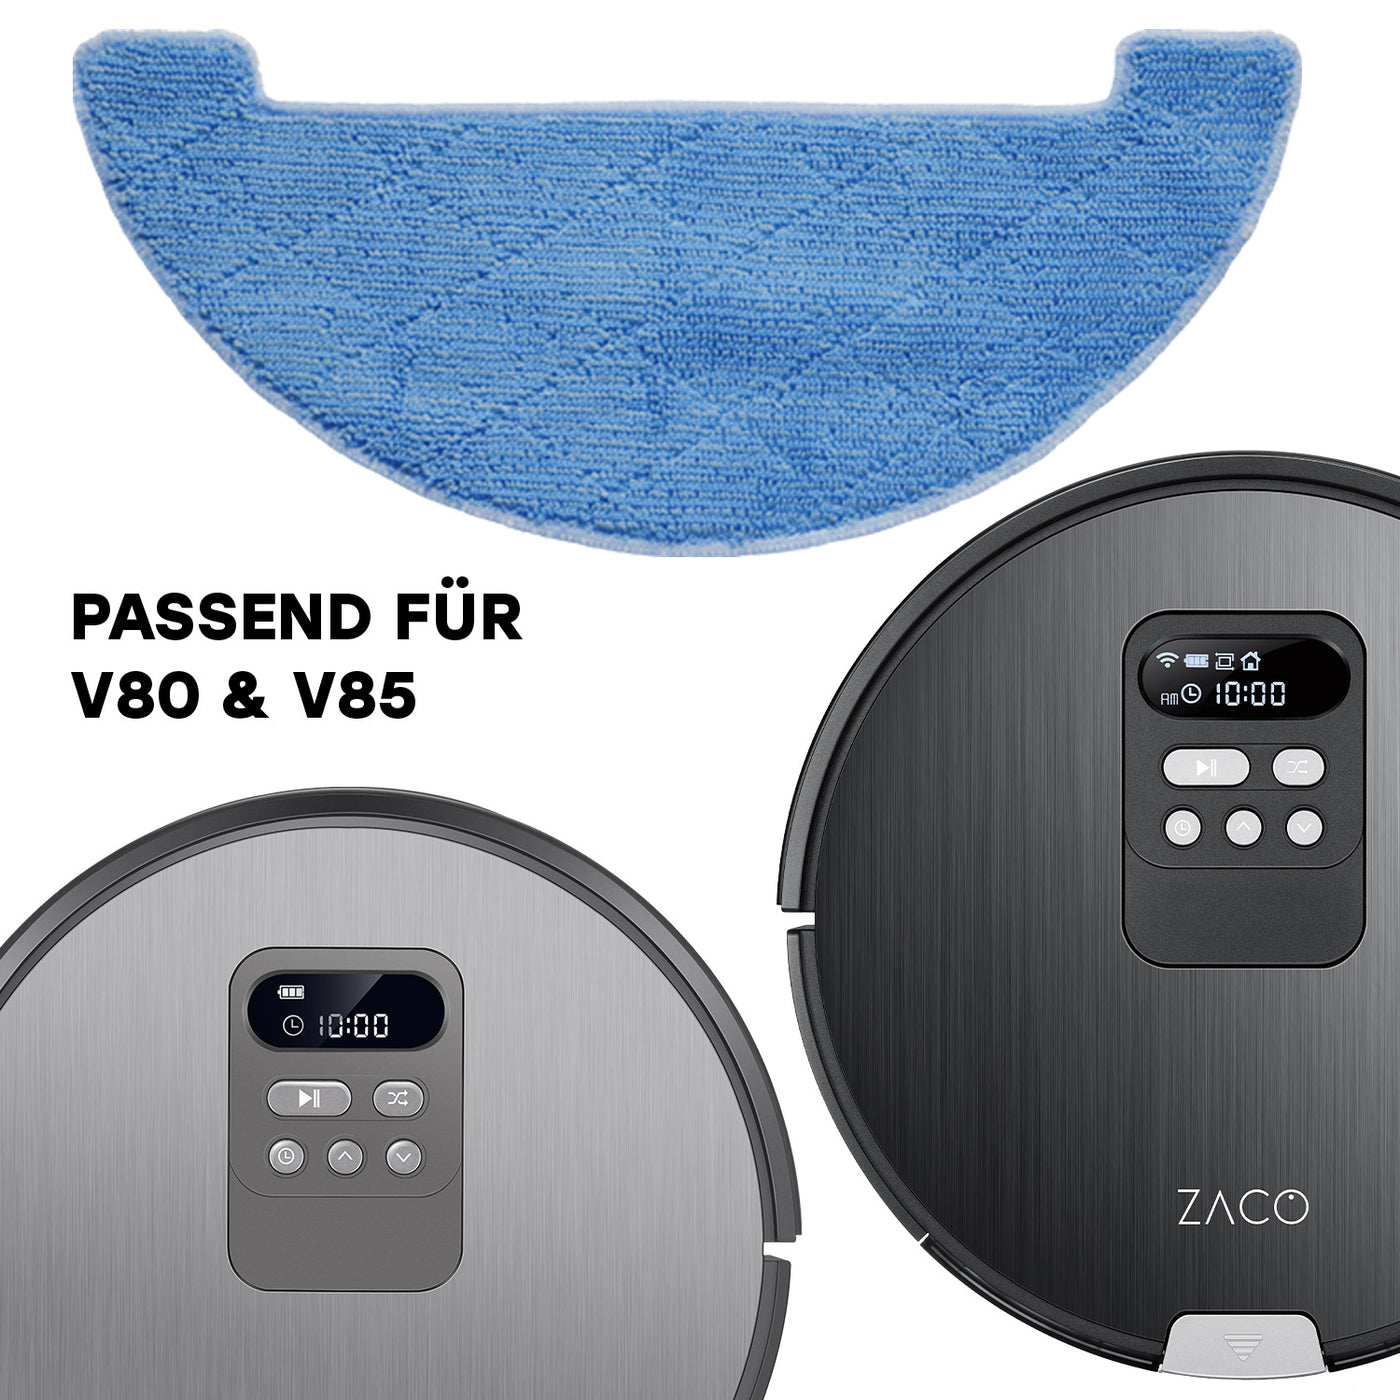 3x Replacement microfiber mop cloths for ZACO V80 & V85